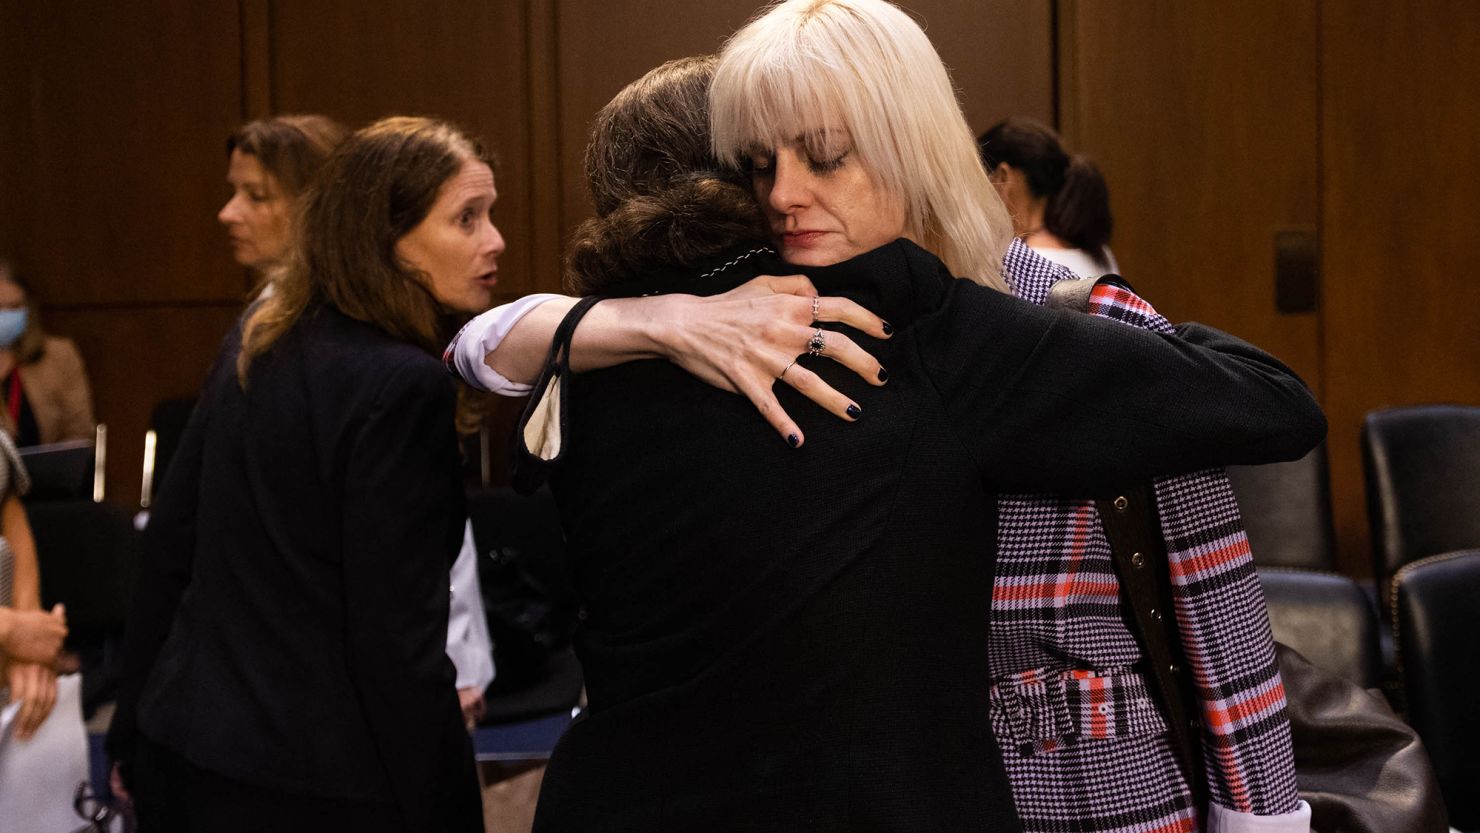 Sen. Dianne Feinstein, a California Democrat, embraces former US gymnast Jessica Howard, after a Senate Judiciary hearing about the Inspector General's report on the FBI handling of the Larry Nassar investigation of sexual abuse of Olympic gymnasts, on Capitol Hill, September 15, 2021, in Washington, DC. 